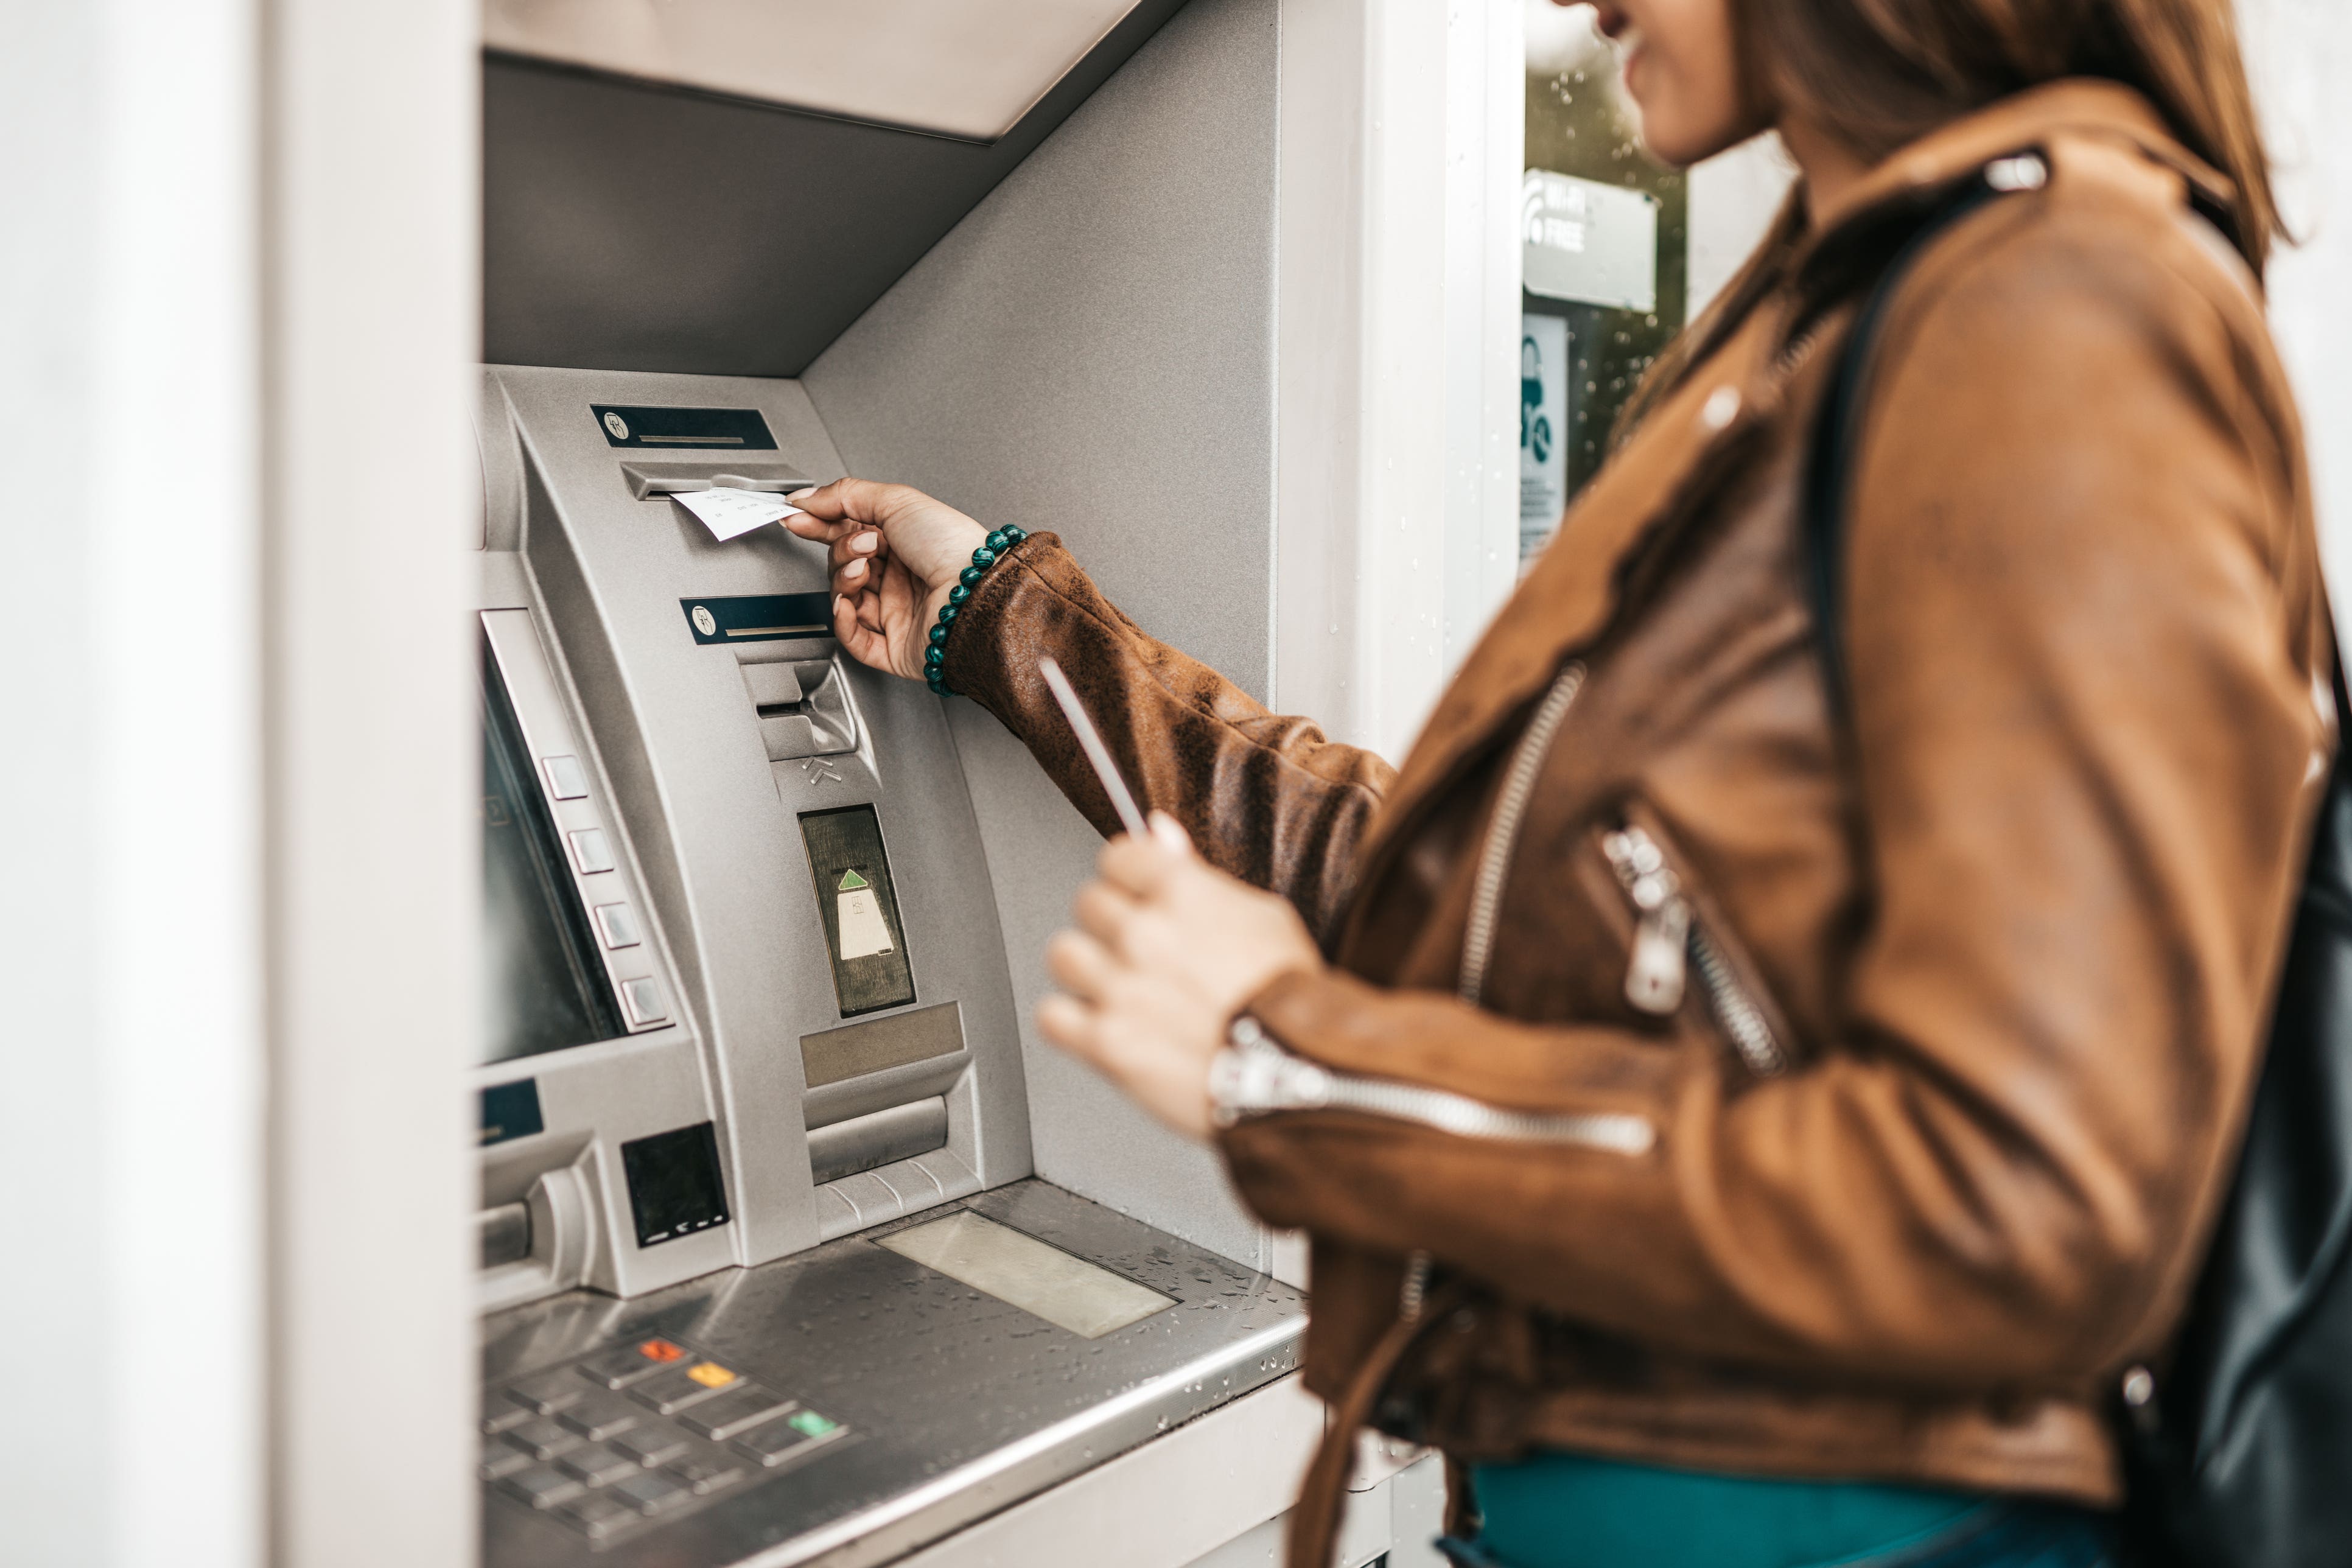 Free cash deposit and withdrawal points must be no more than one mile away for people living in urban areas, rising to three miles in rural areas, under the plans